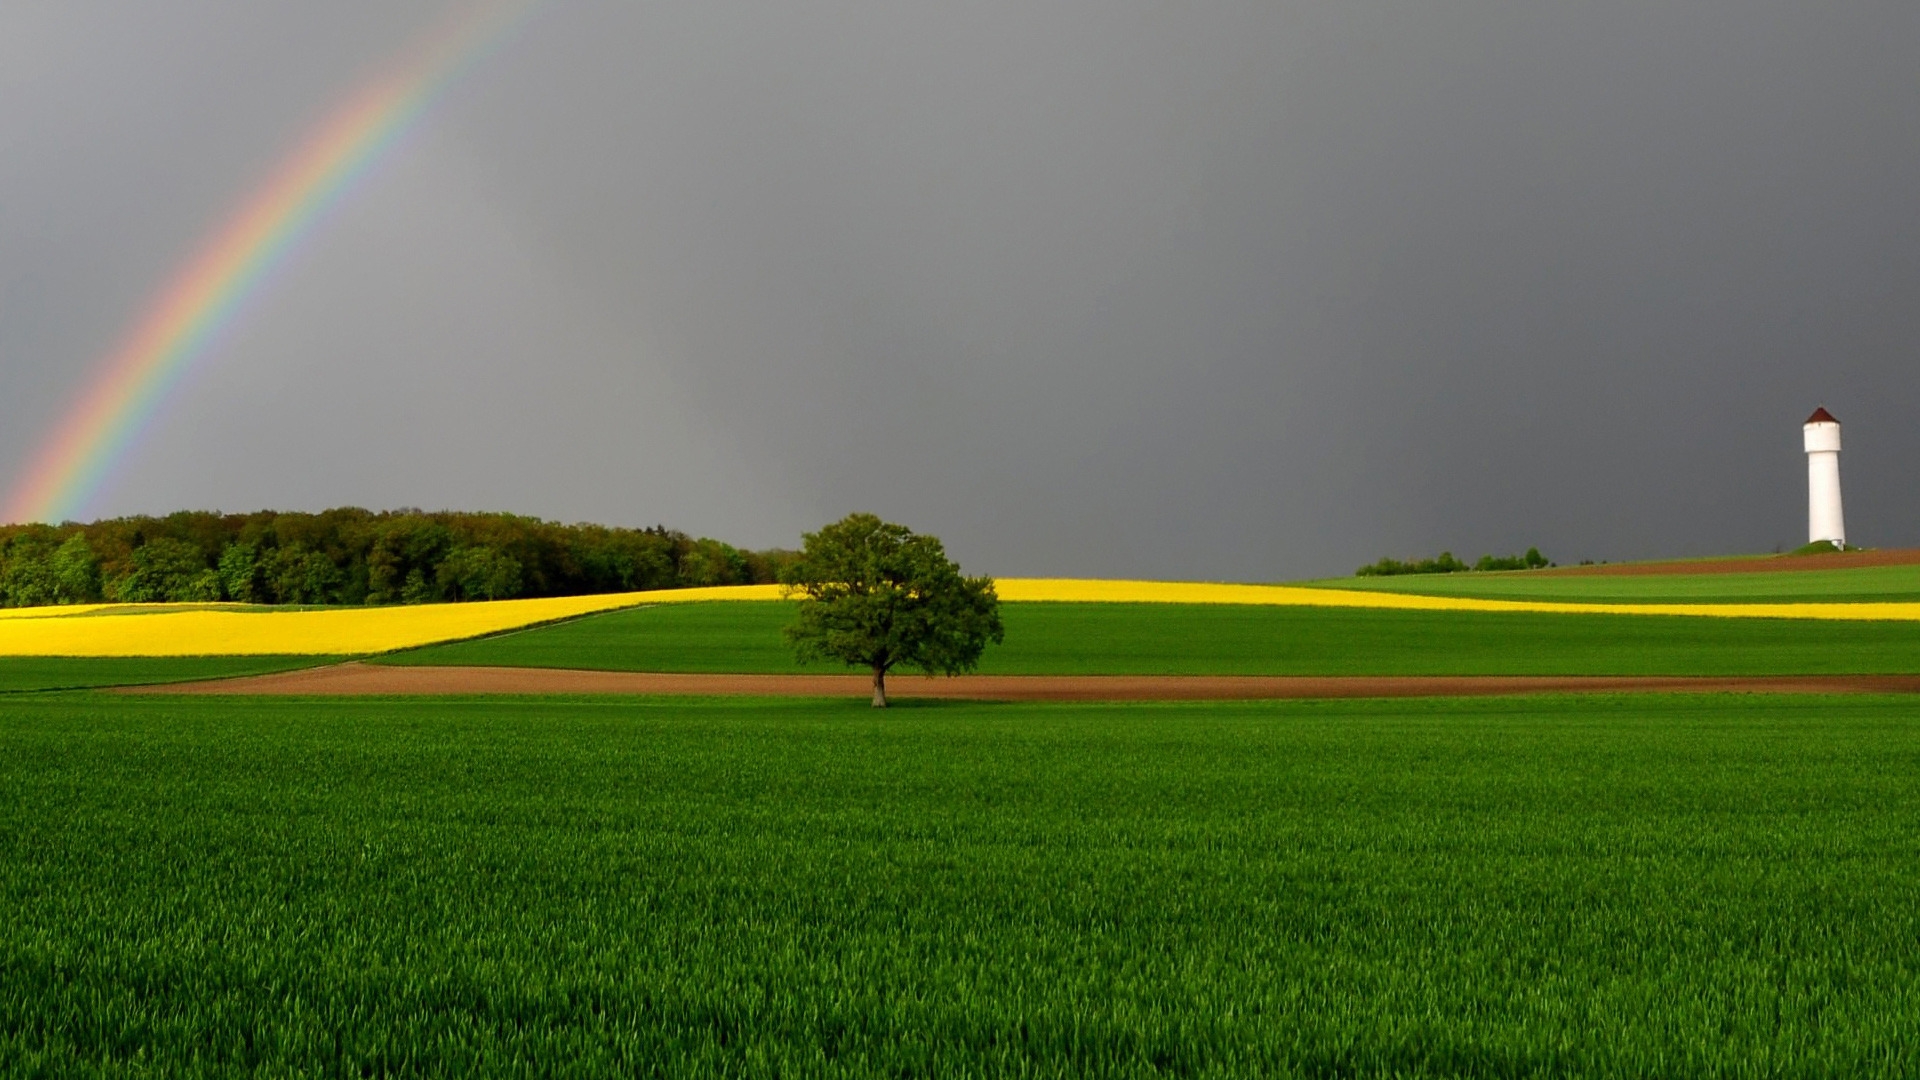 Green Fields and Rainbow for 1920 x 1080 HDTV 1080p resolution